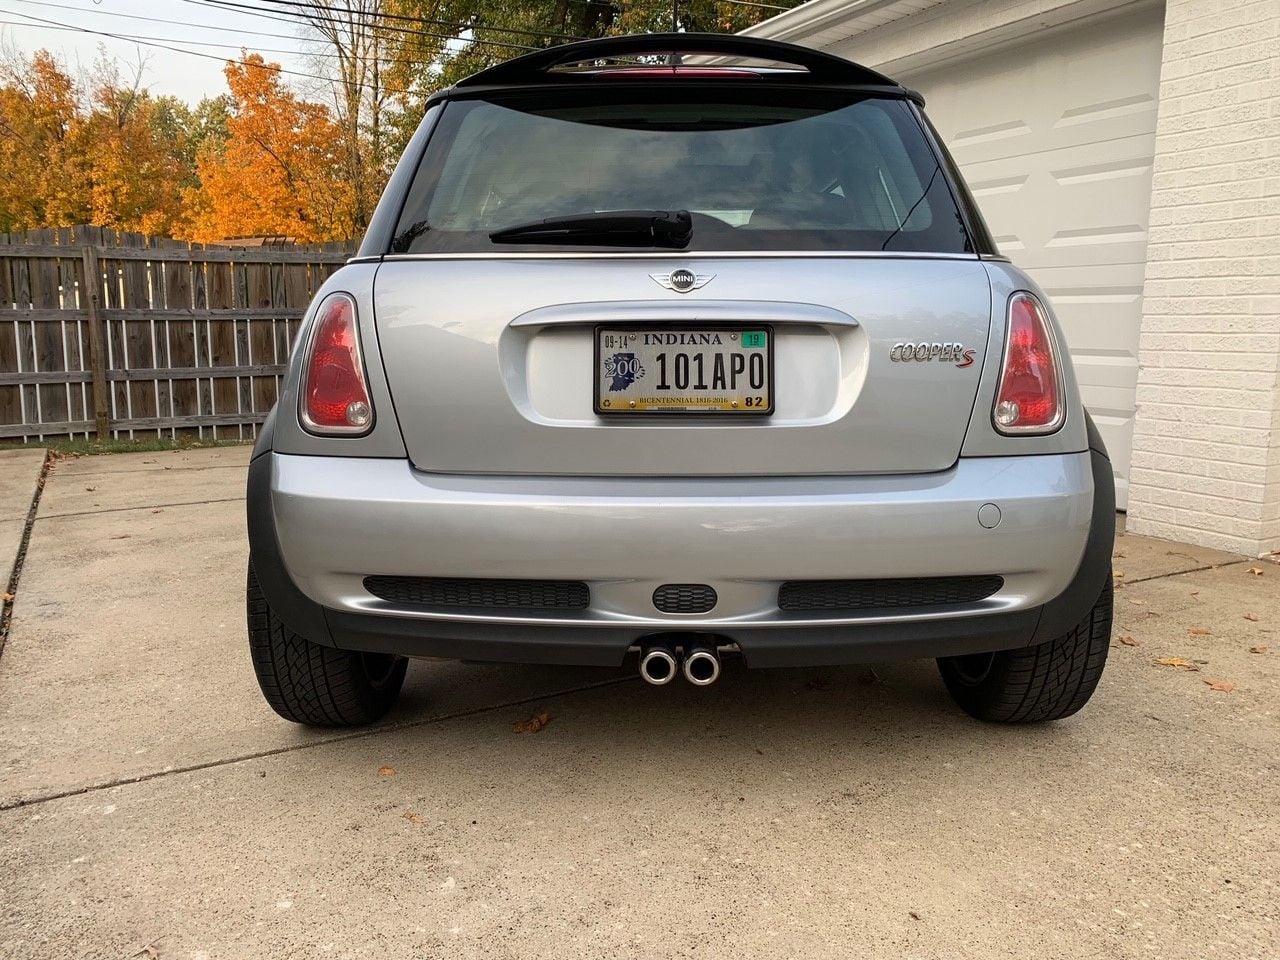 2005 Mini Cooper - FS: 2005 R53 Mini Cooper S 6 Speed- Excellent Condition - Used - VIN WMWRE33435TD97699 - 120,000 Miles - 4 cyl - 2WD - Manual - Hatchback - Silver - Evansville, IN 47714, United States